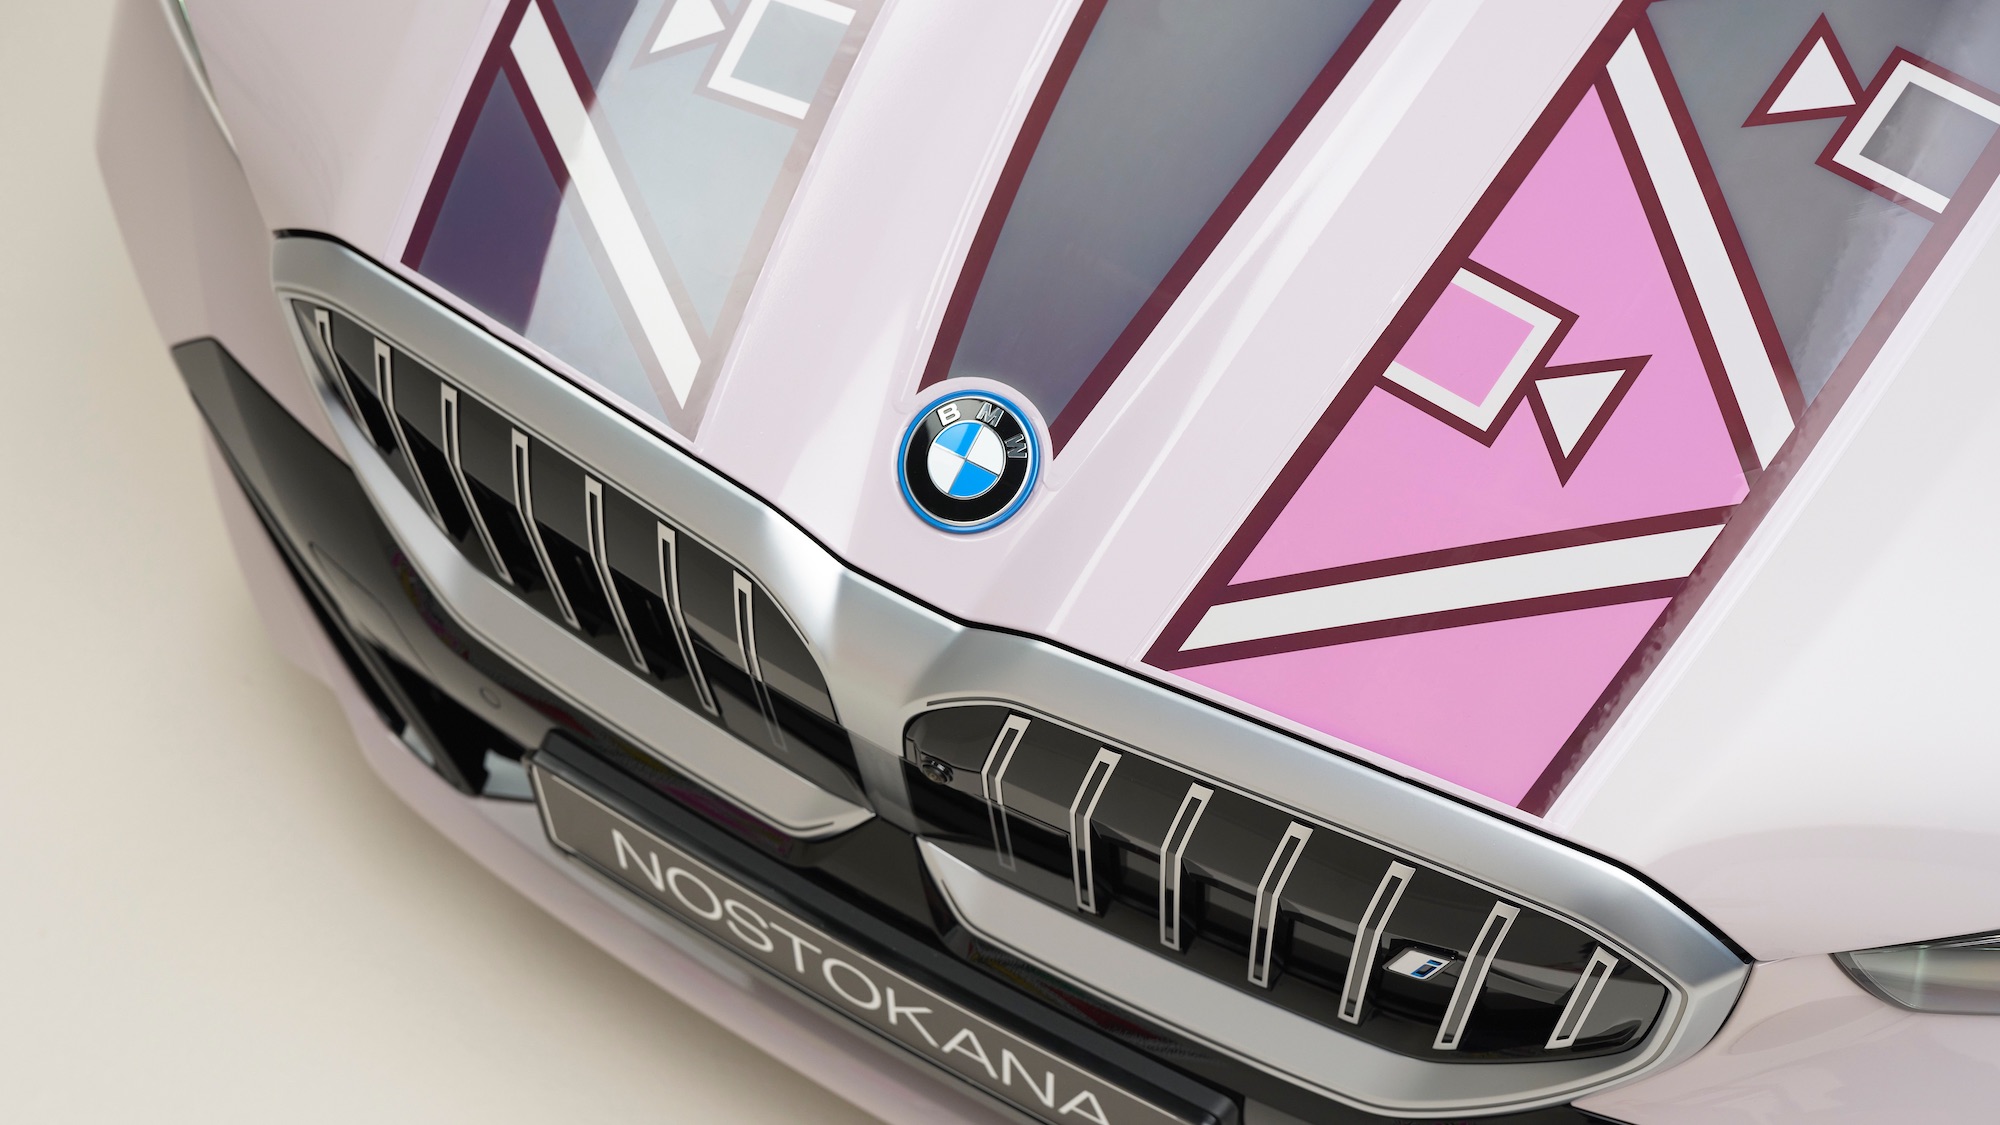 the hood of a BMW painted with pink, grey, and purple colors